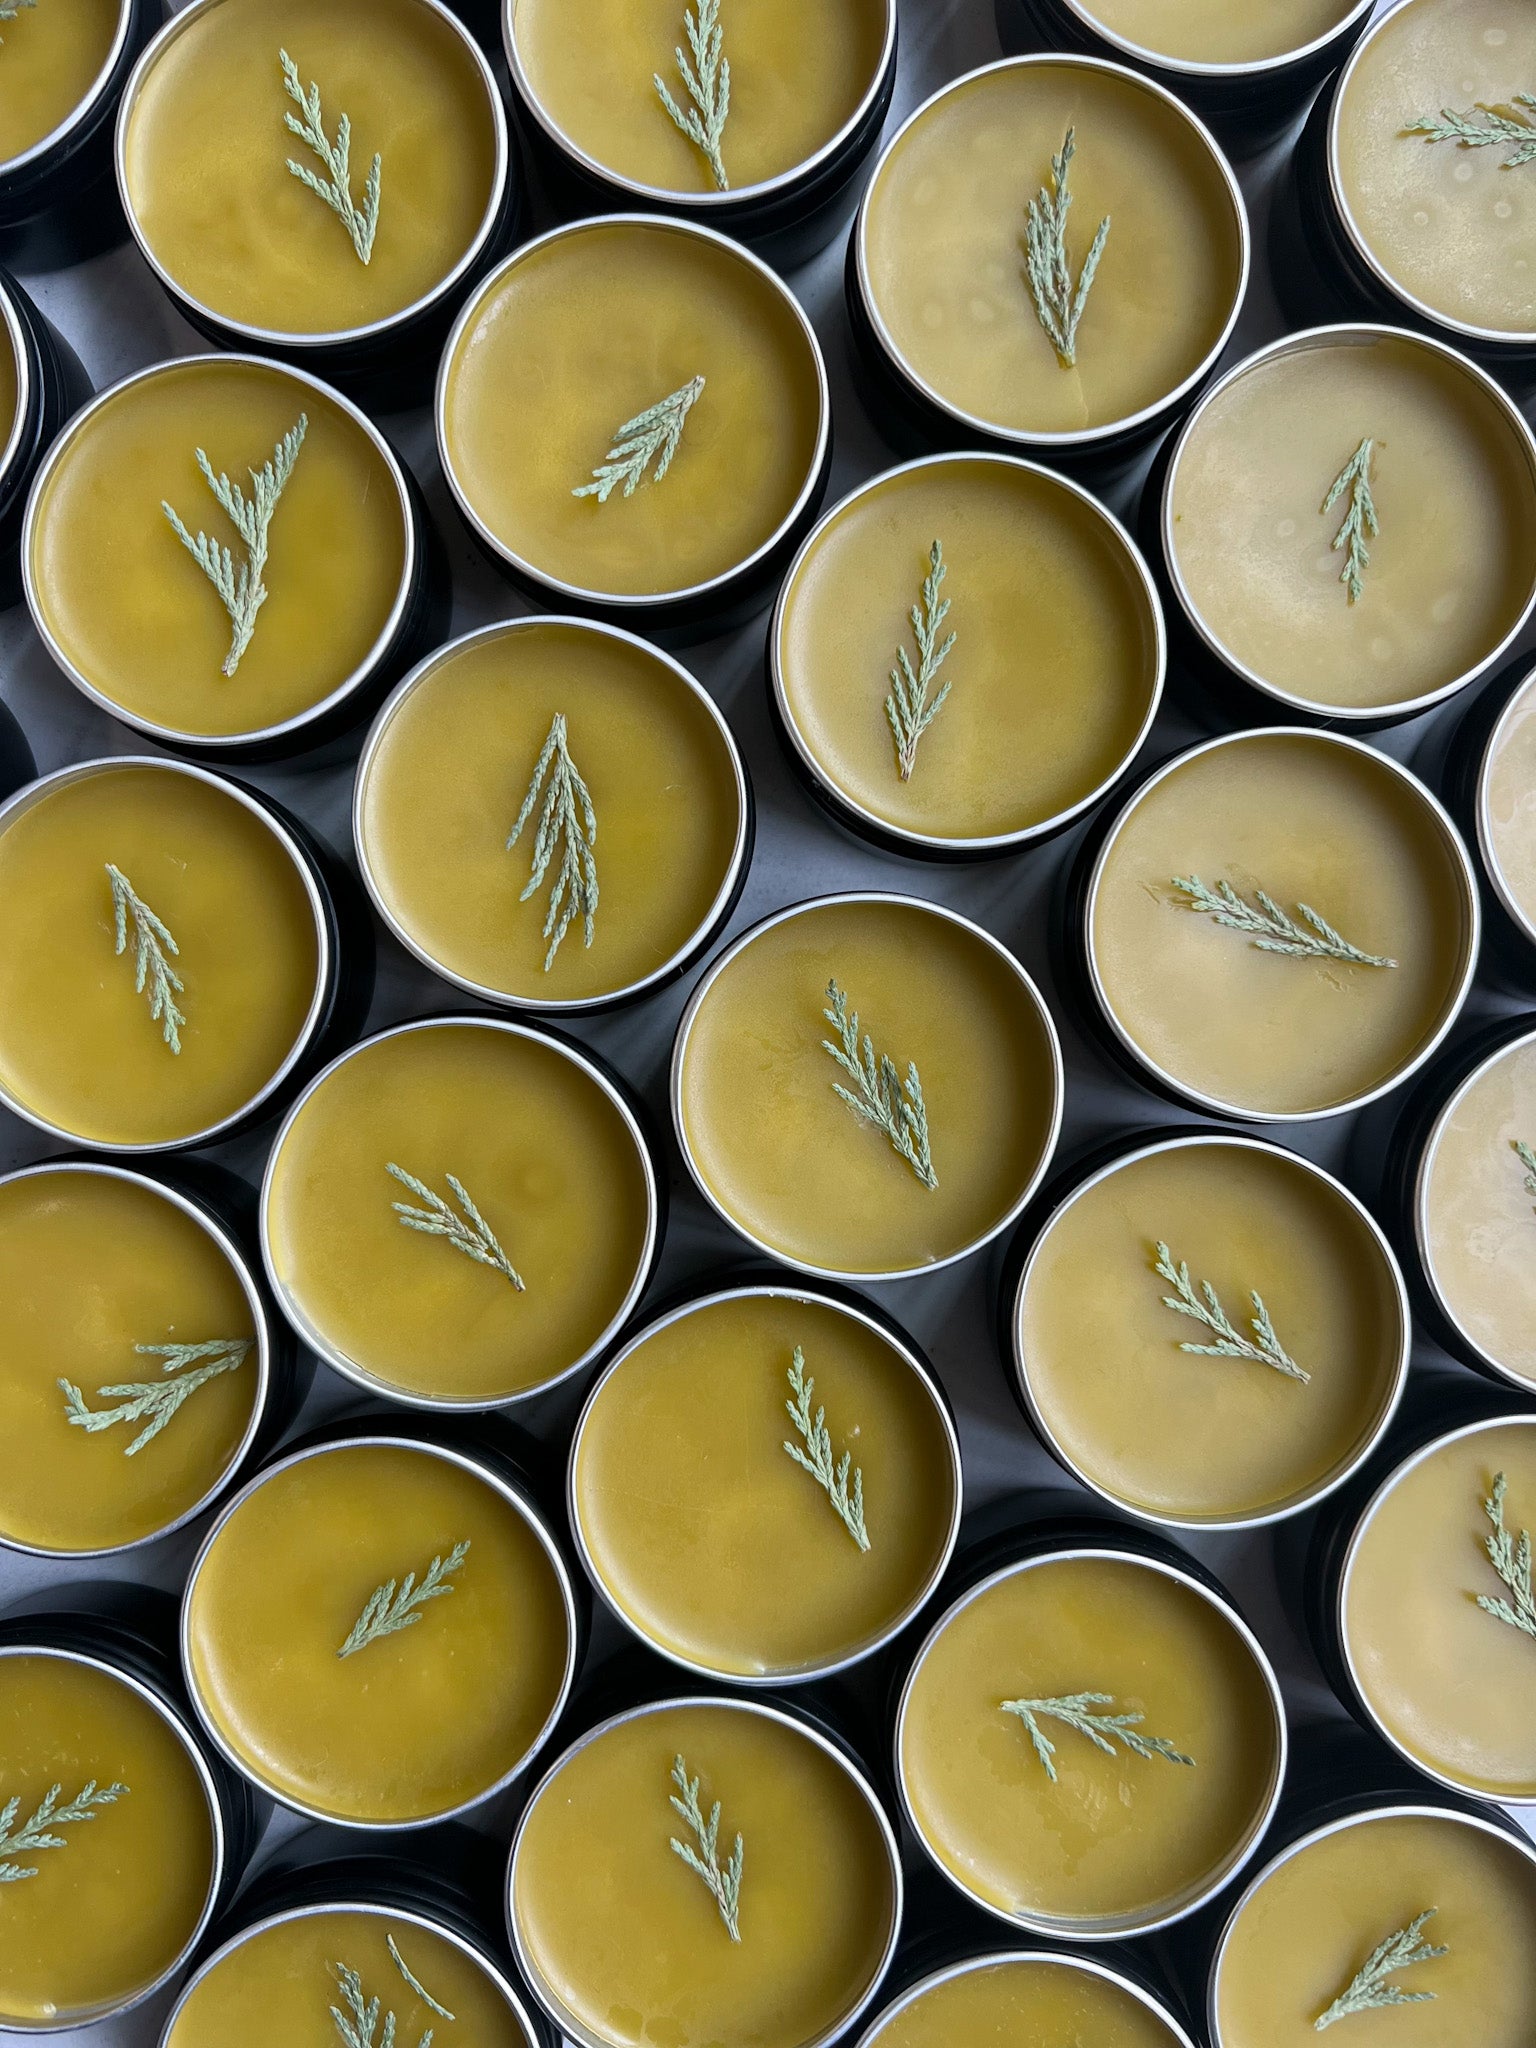 ALL-PURPOSE BOTANICAL SALVE | Fawn Lily Botanica - An ultra-nourishing botanical salve balm made from fresh herbs, flowers, wild plants, and tree tips harvested from the Pacific Northwest bioregion!